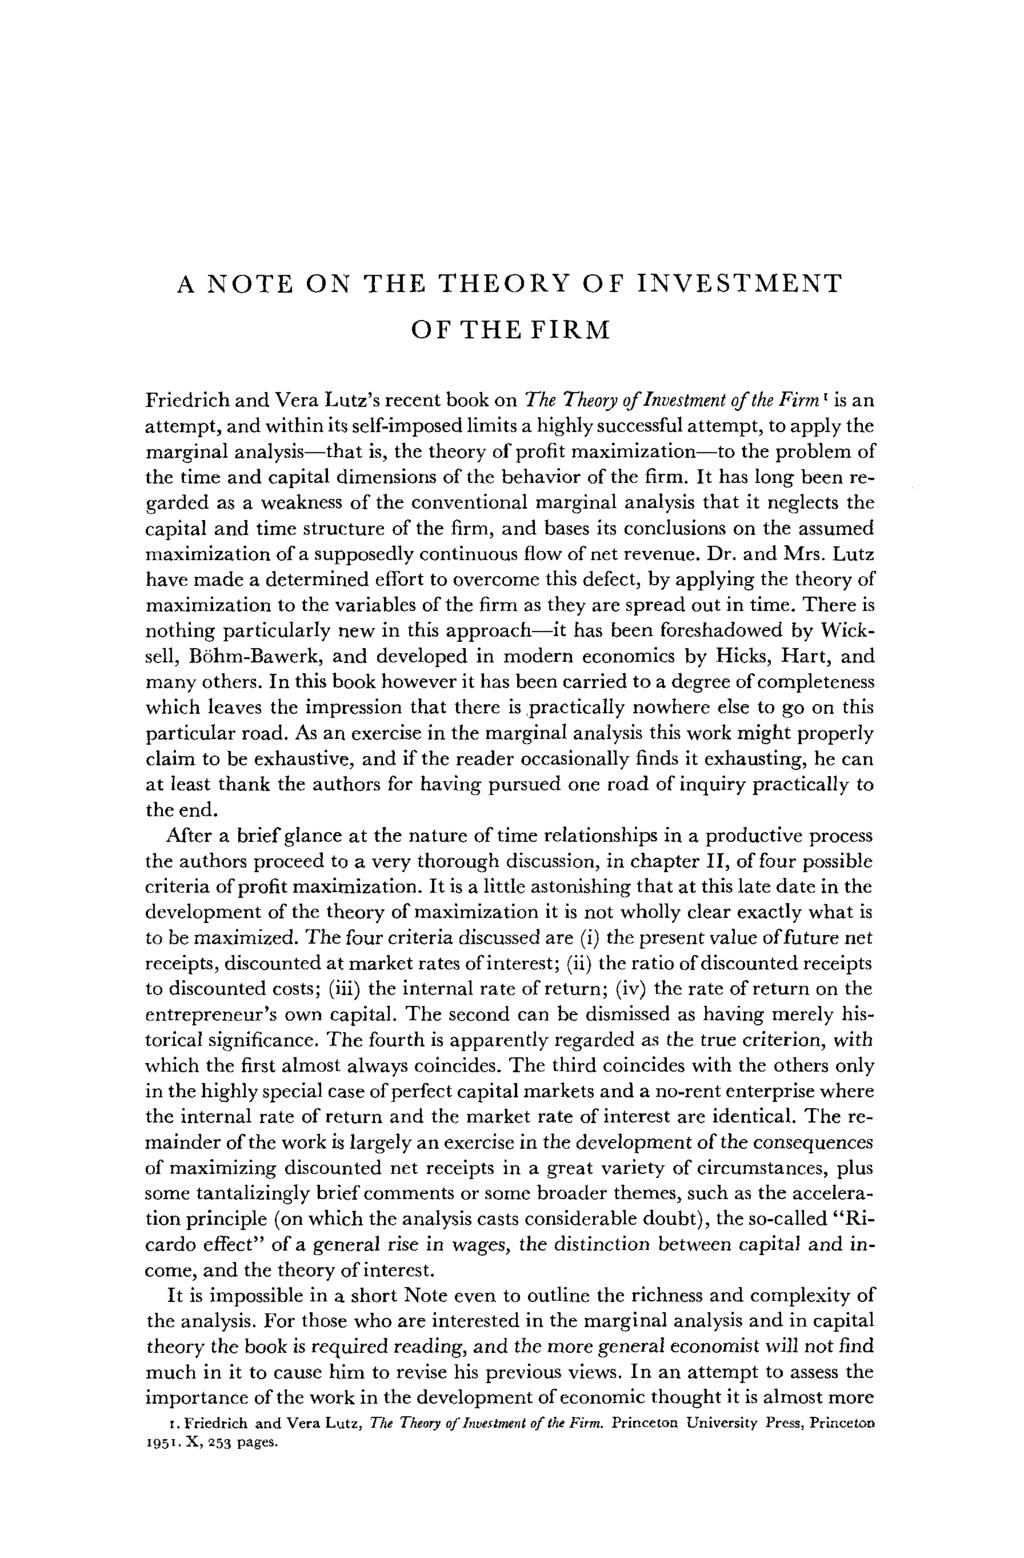 A NOTE ON THE THEORY OF INVESTMENT OF THE FIRM Friedrich and Vera Lutz s recent book on The Theory of Investment of the Firm I is an attempt, and within its self-imposed limits a highly successful